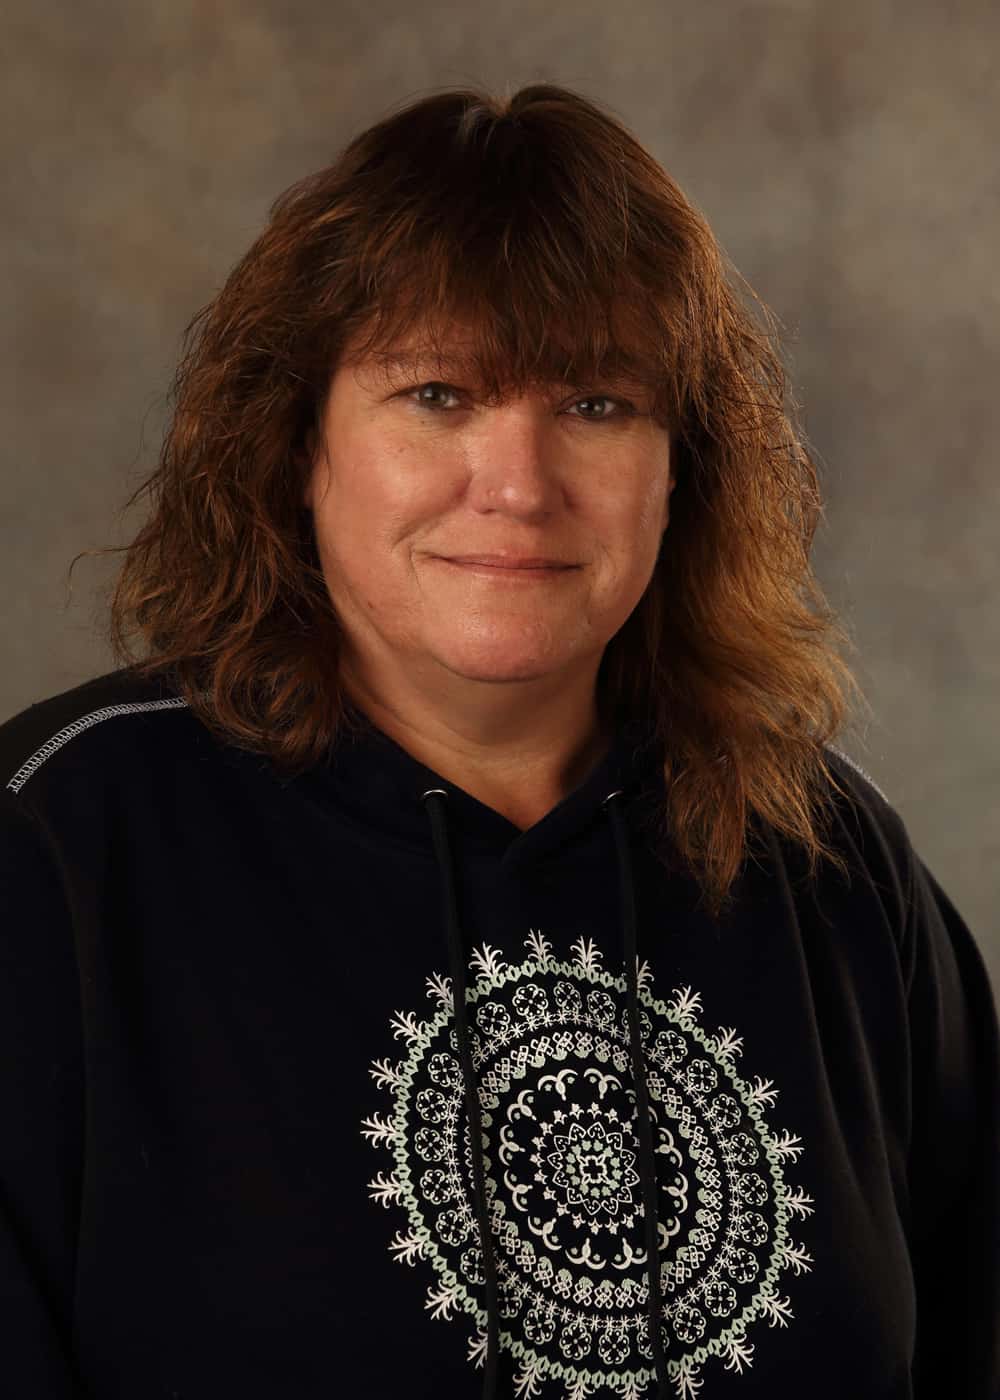 Photo of Co-Teacher Debra Lampe. She is a Caucasian woman with long brown hair. She is smiling and wears a black sweatshirt with a white mandala-like design on it.